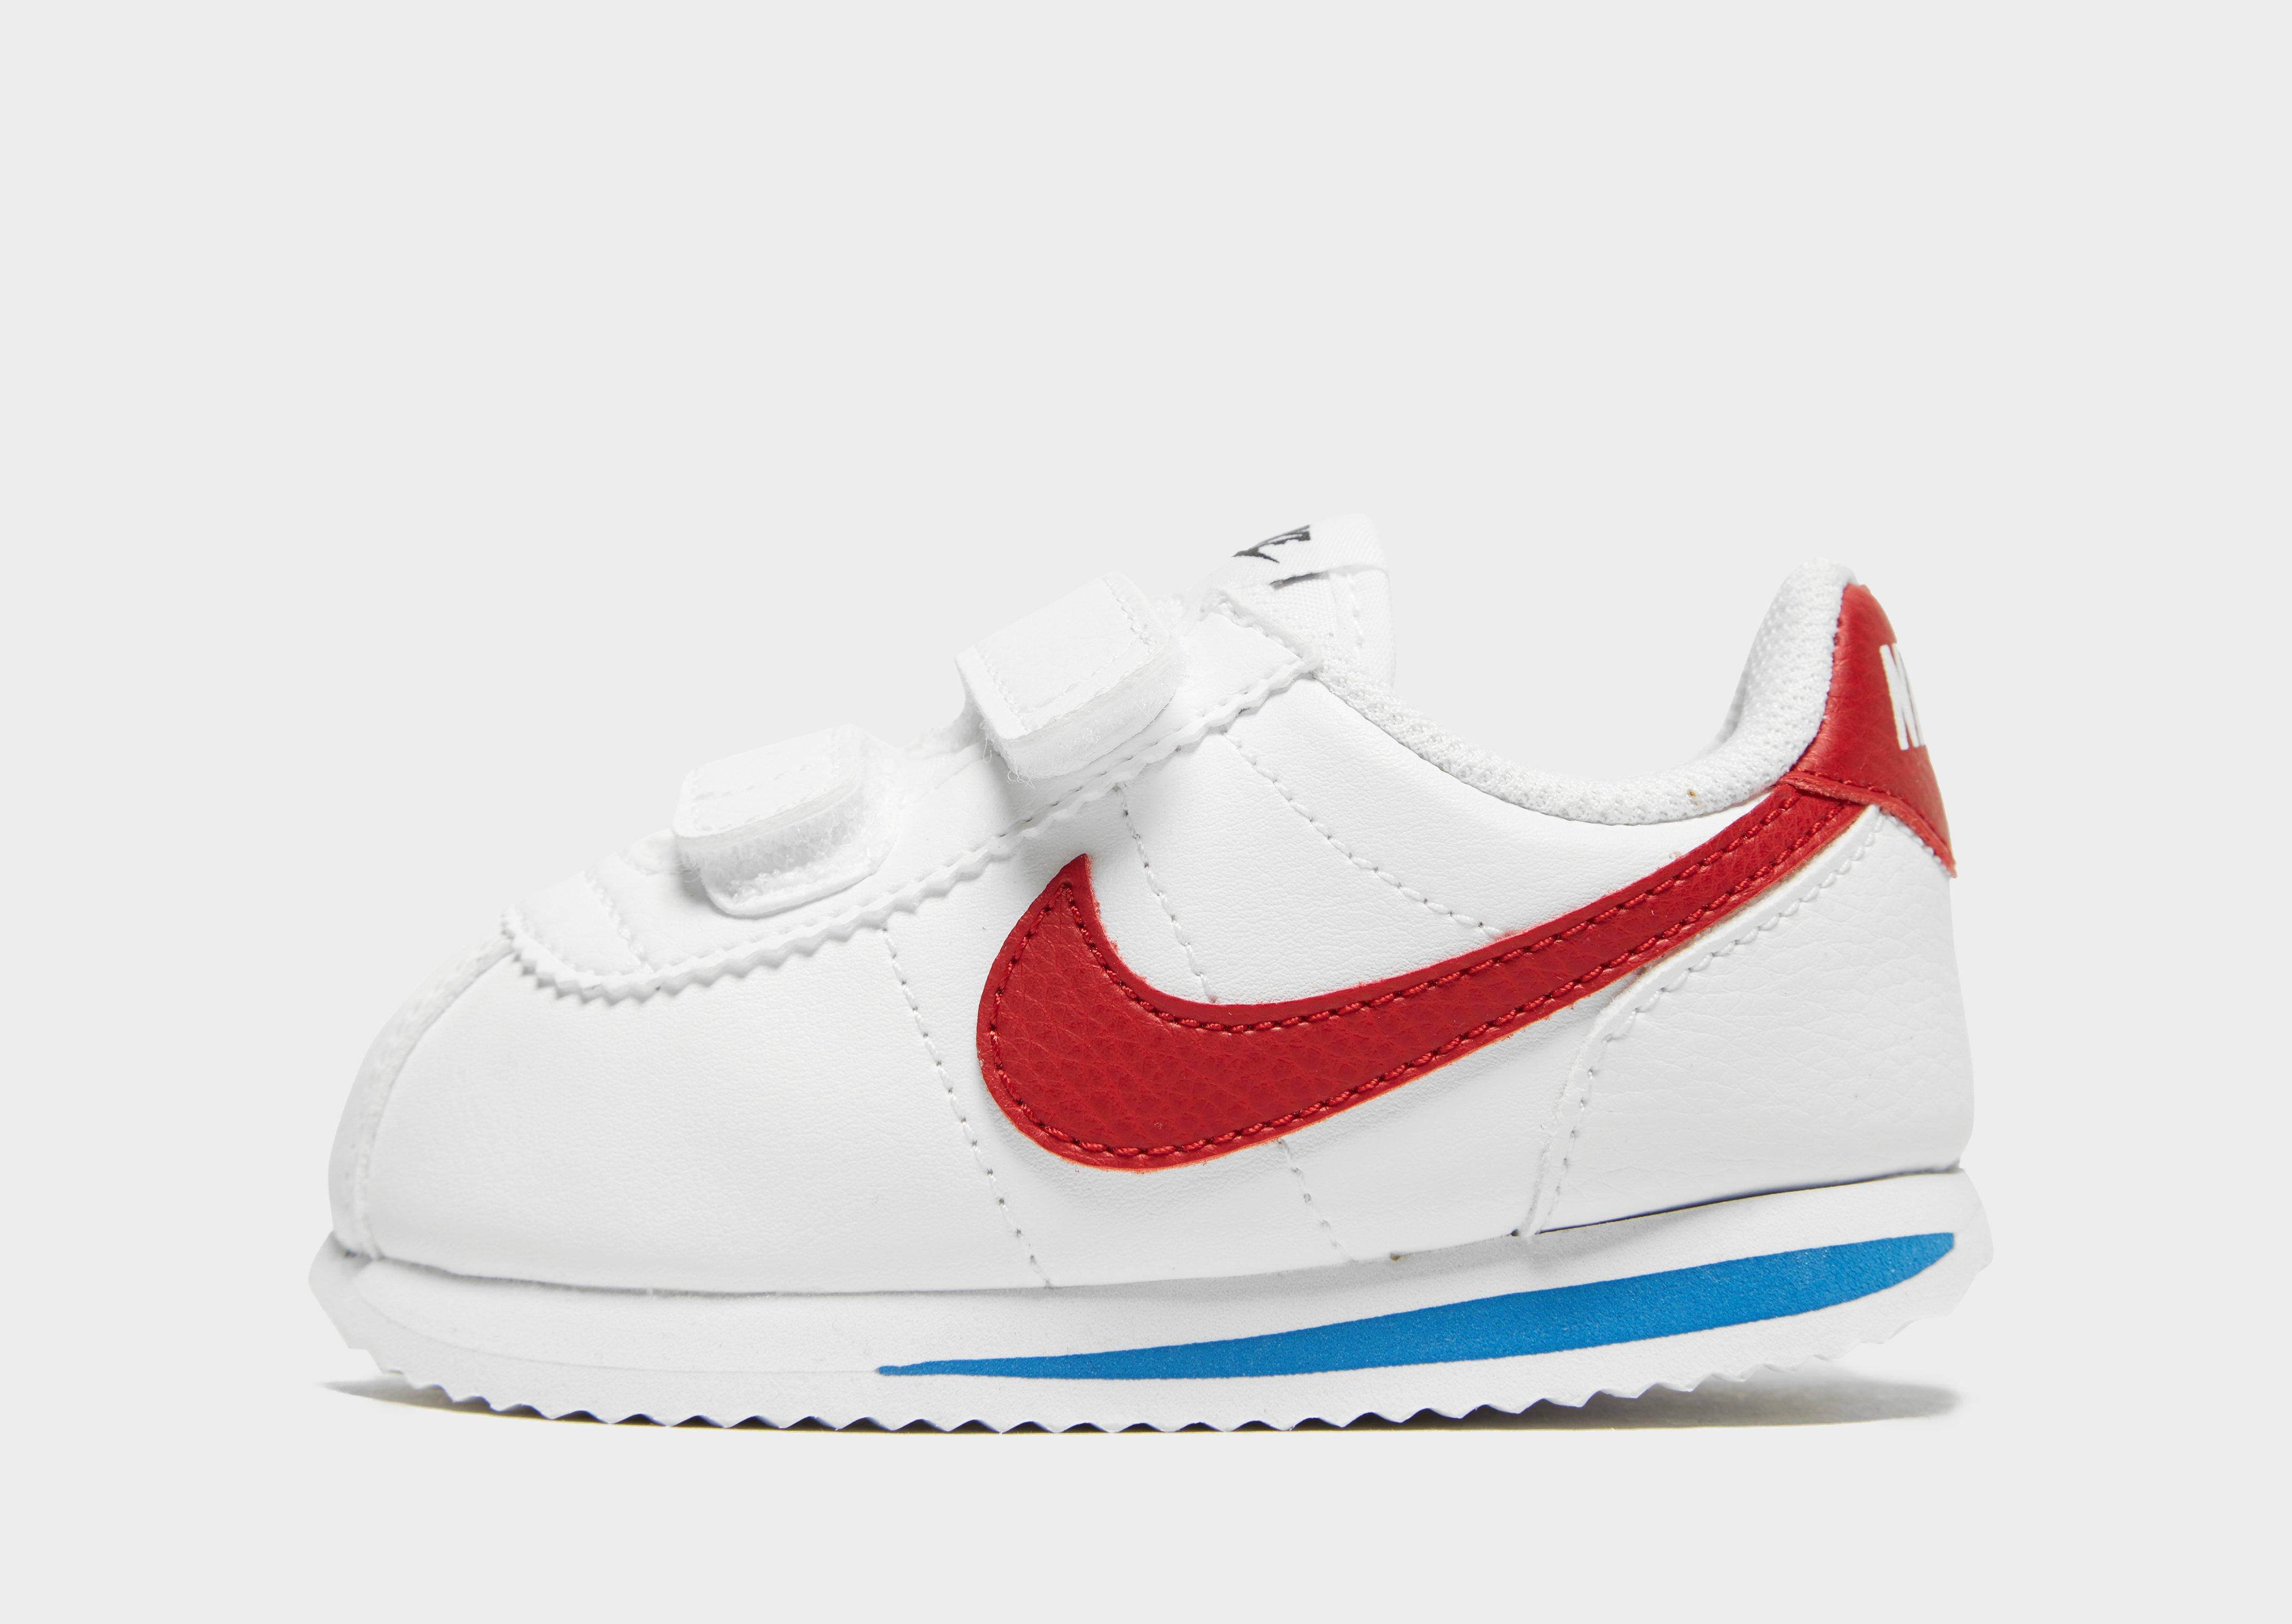 nike cortez for baby girl